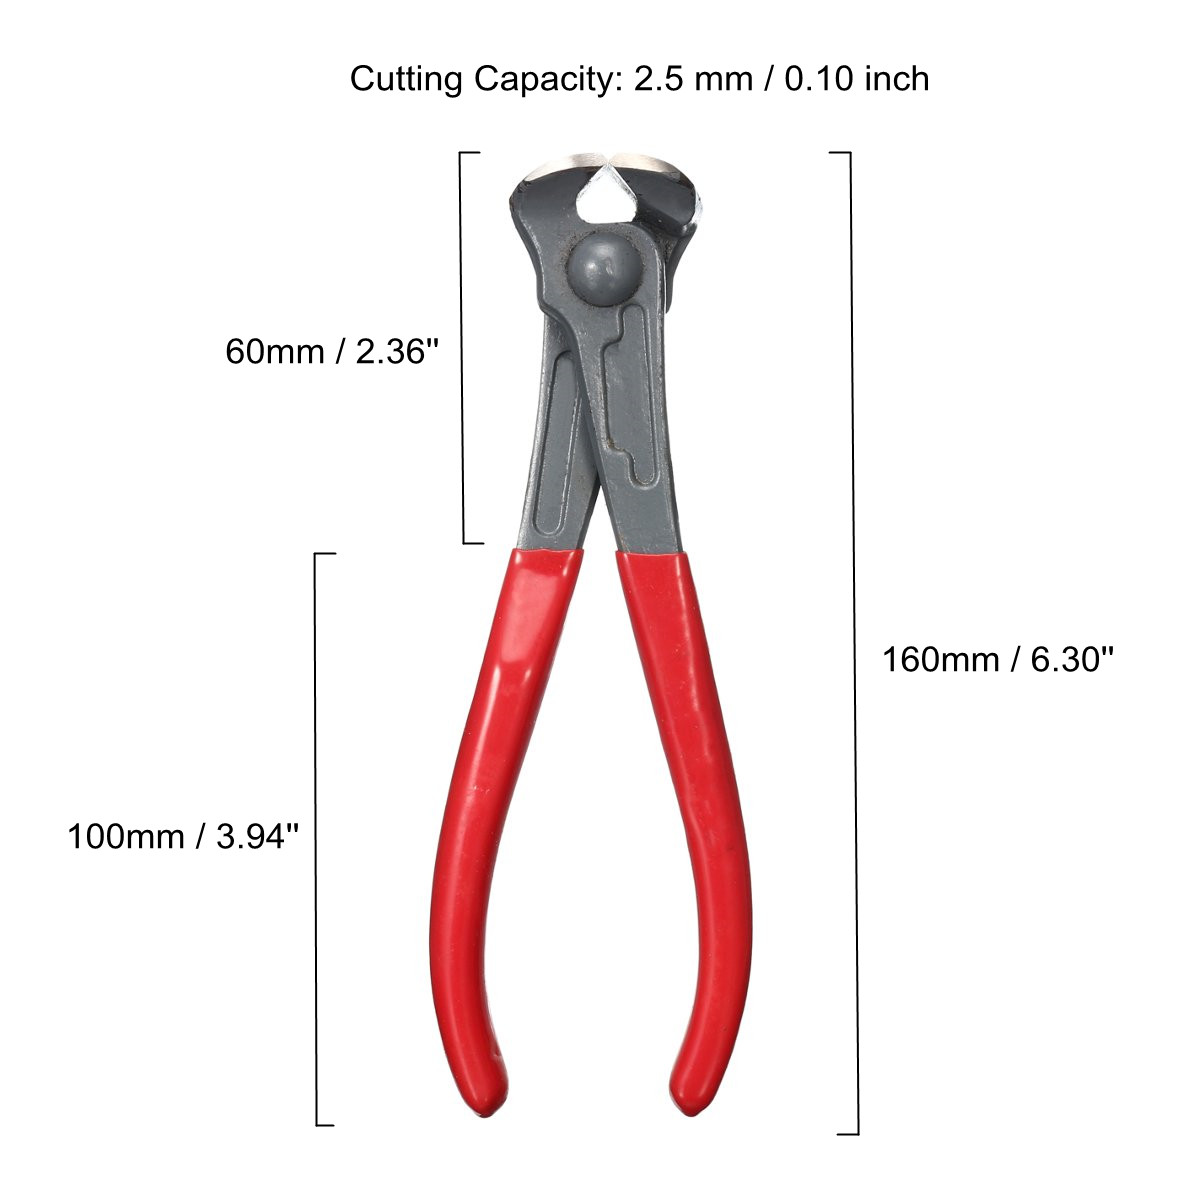 6-Inch-Steel-Fixers-End-Nippers-Cutting-Cutter-Wire-Pliers-TPR-Grip-Hand-Tool-1574164